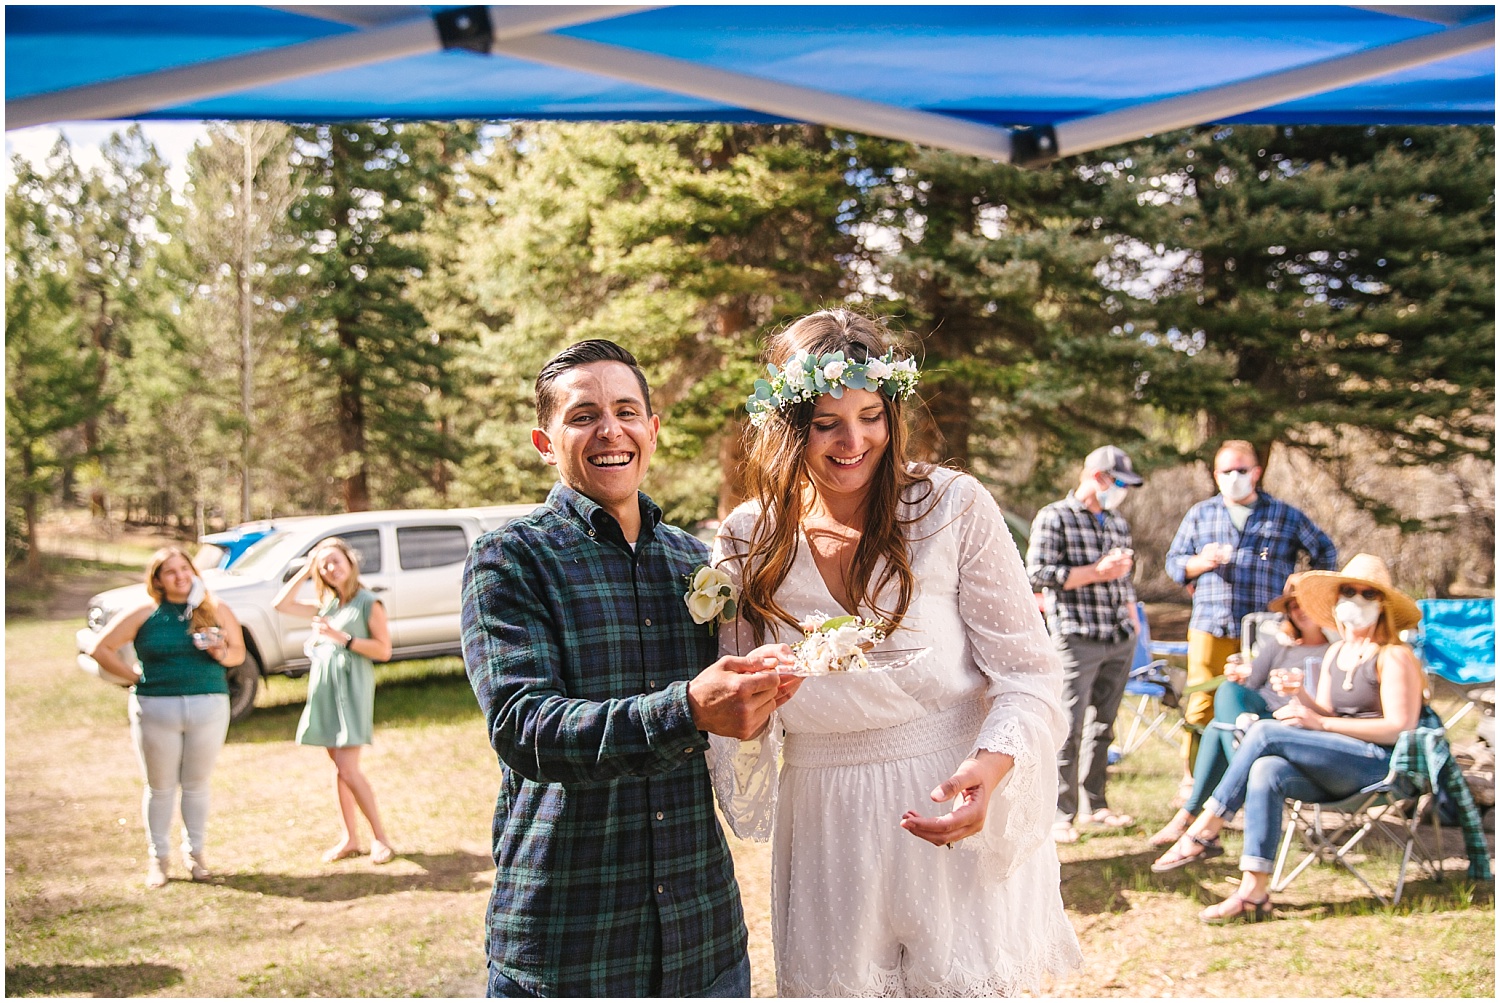 Bride and groom cut mini wedding cake at backcountry campsite elopement in Colorado